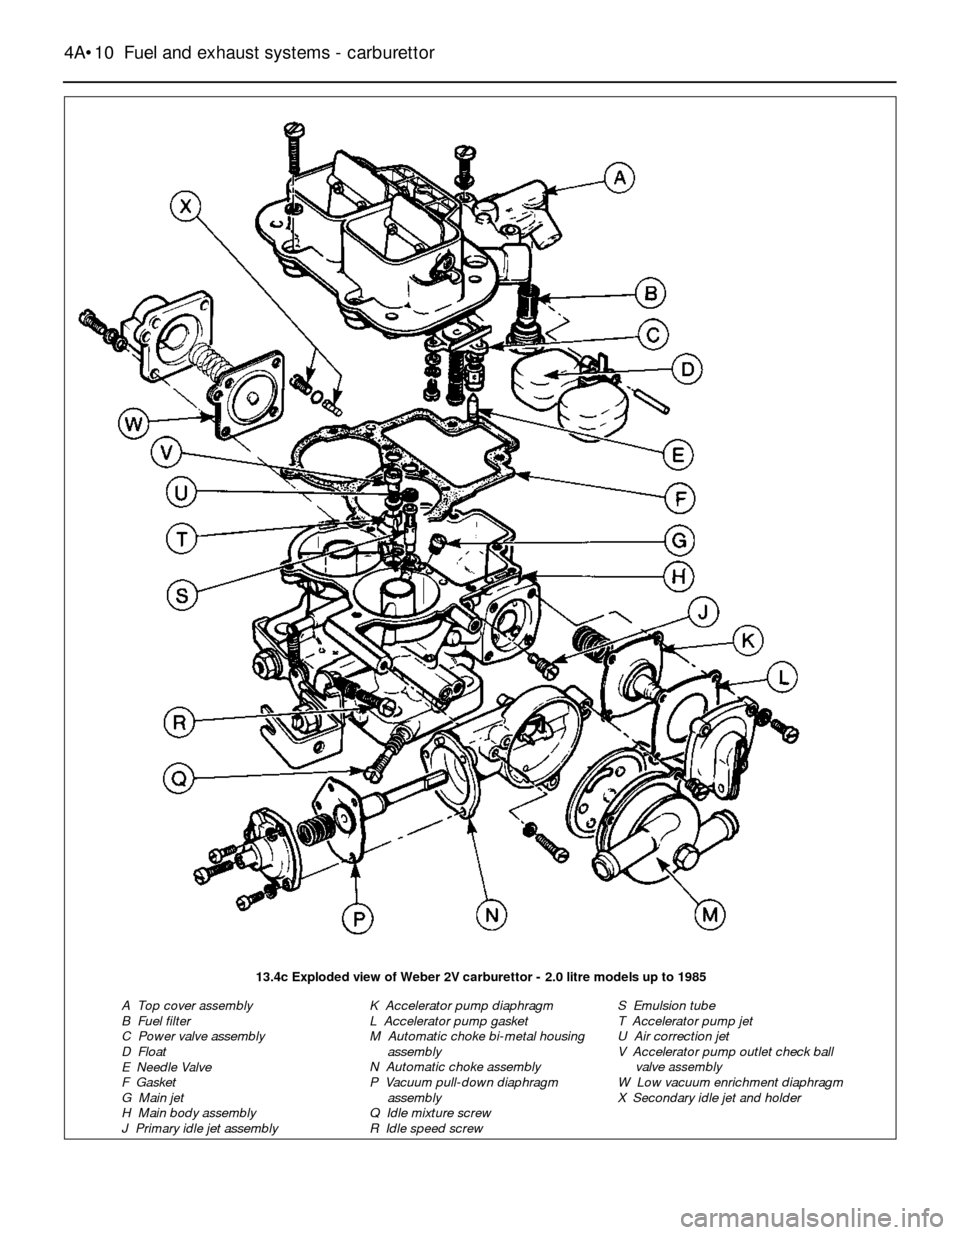 FORD SIERRA 1982 1.G Fuel And Exhaust Systems Carburettor Workshop Manual 4A•10Fuel and exhaust systems - carburettor
13.4c Exploded view of Weber 2V carburettor - 2.0 litre models up to 1985
A  Top cover assembly
B  Fuel filter
C  Power valve assembly
D  Float
E  Needle 